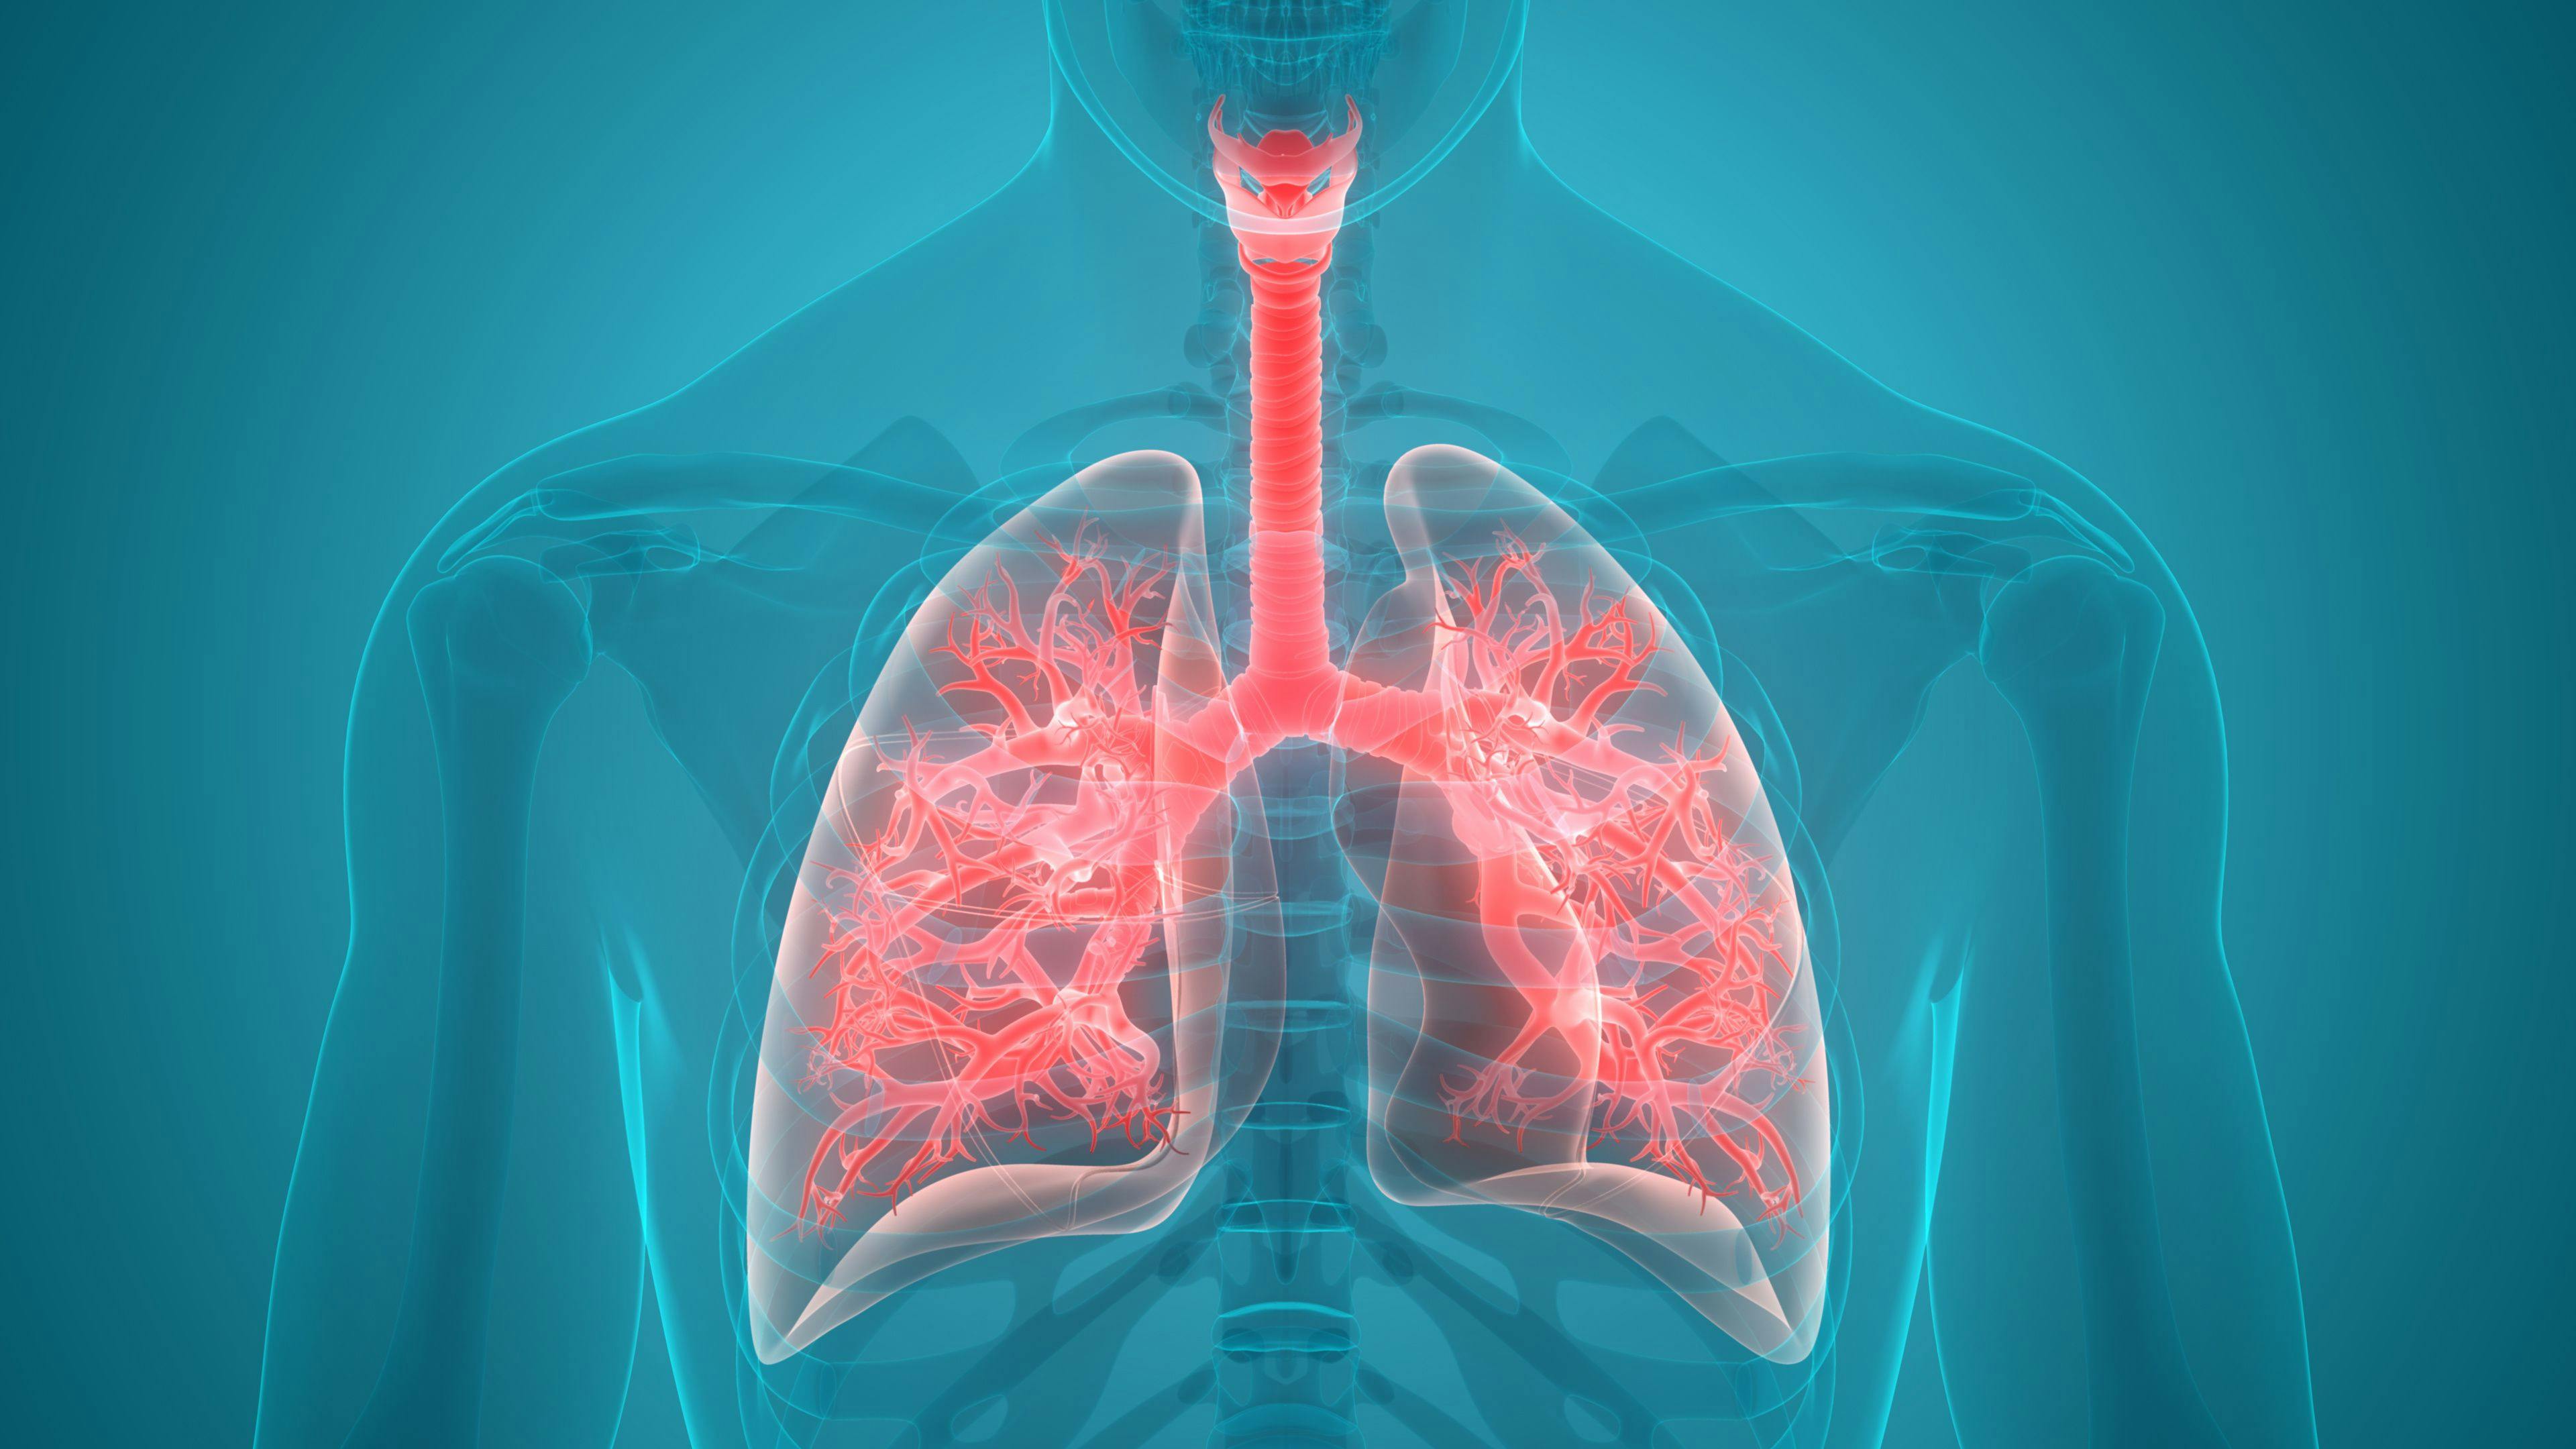 Low Levels of Vitamin K Associated With Poor Lung Health